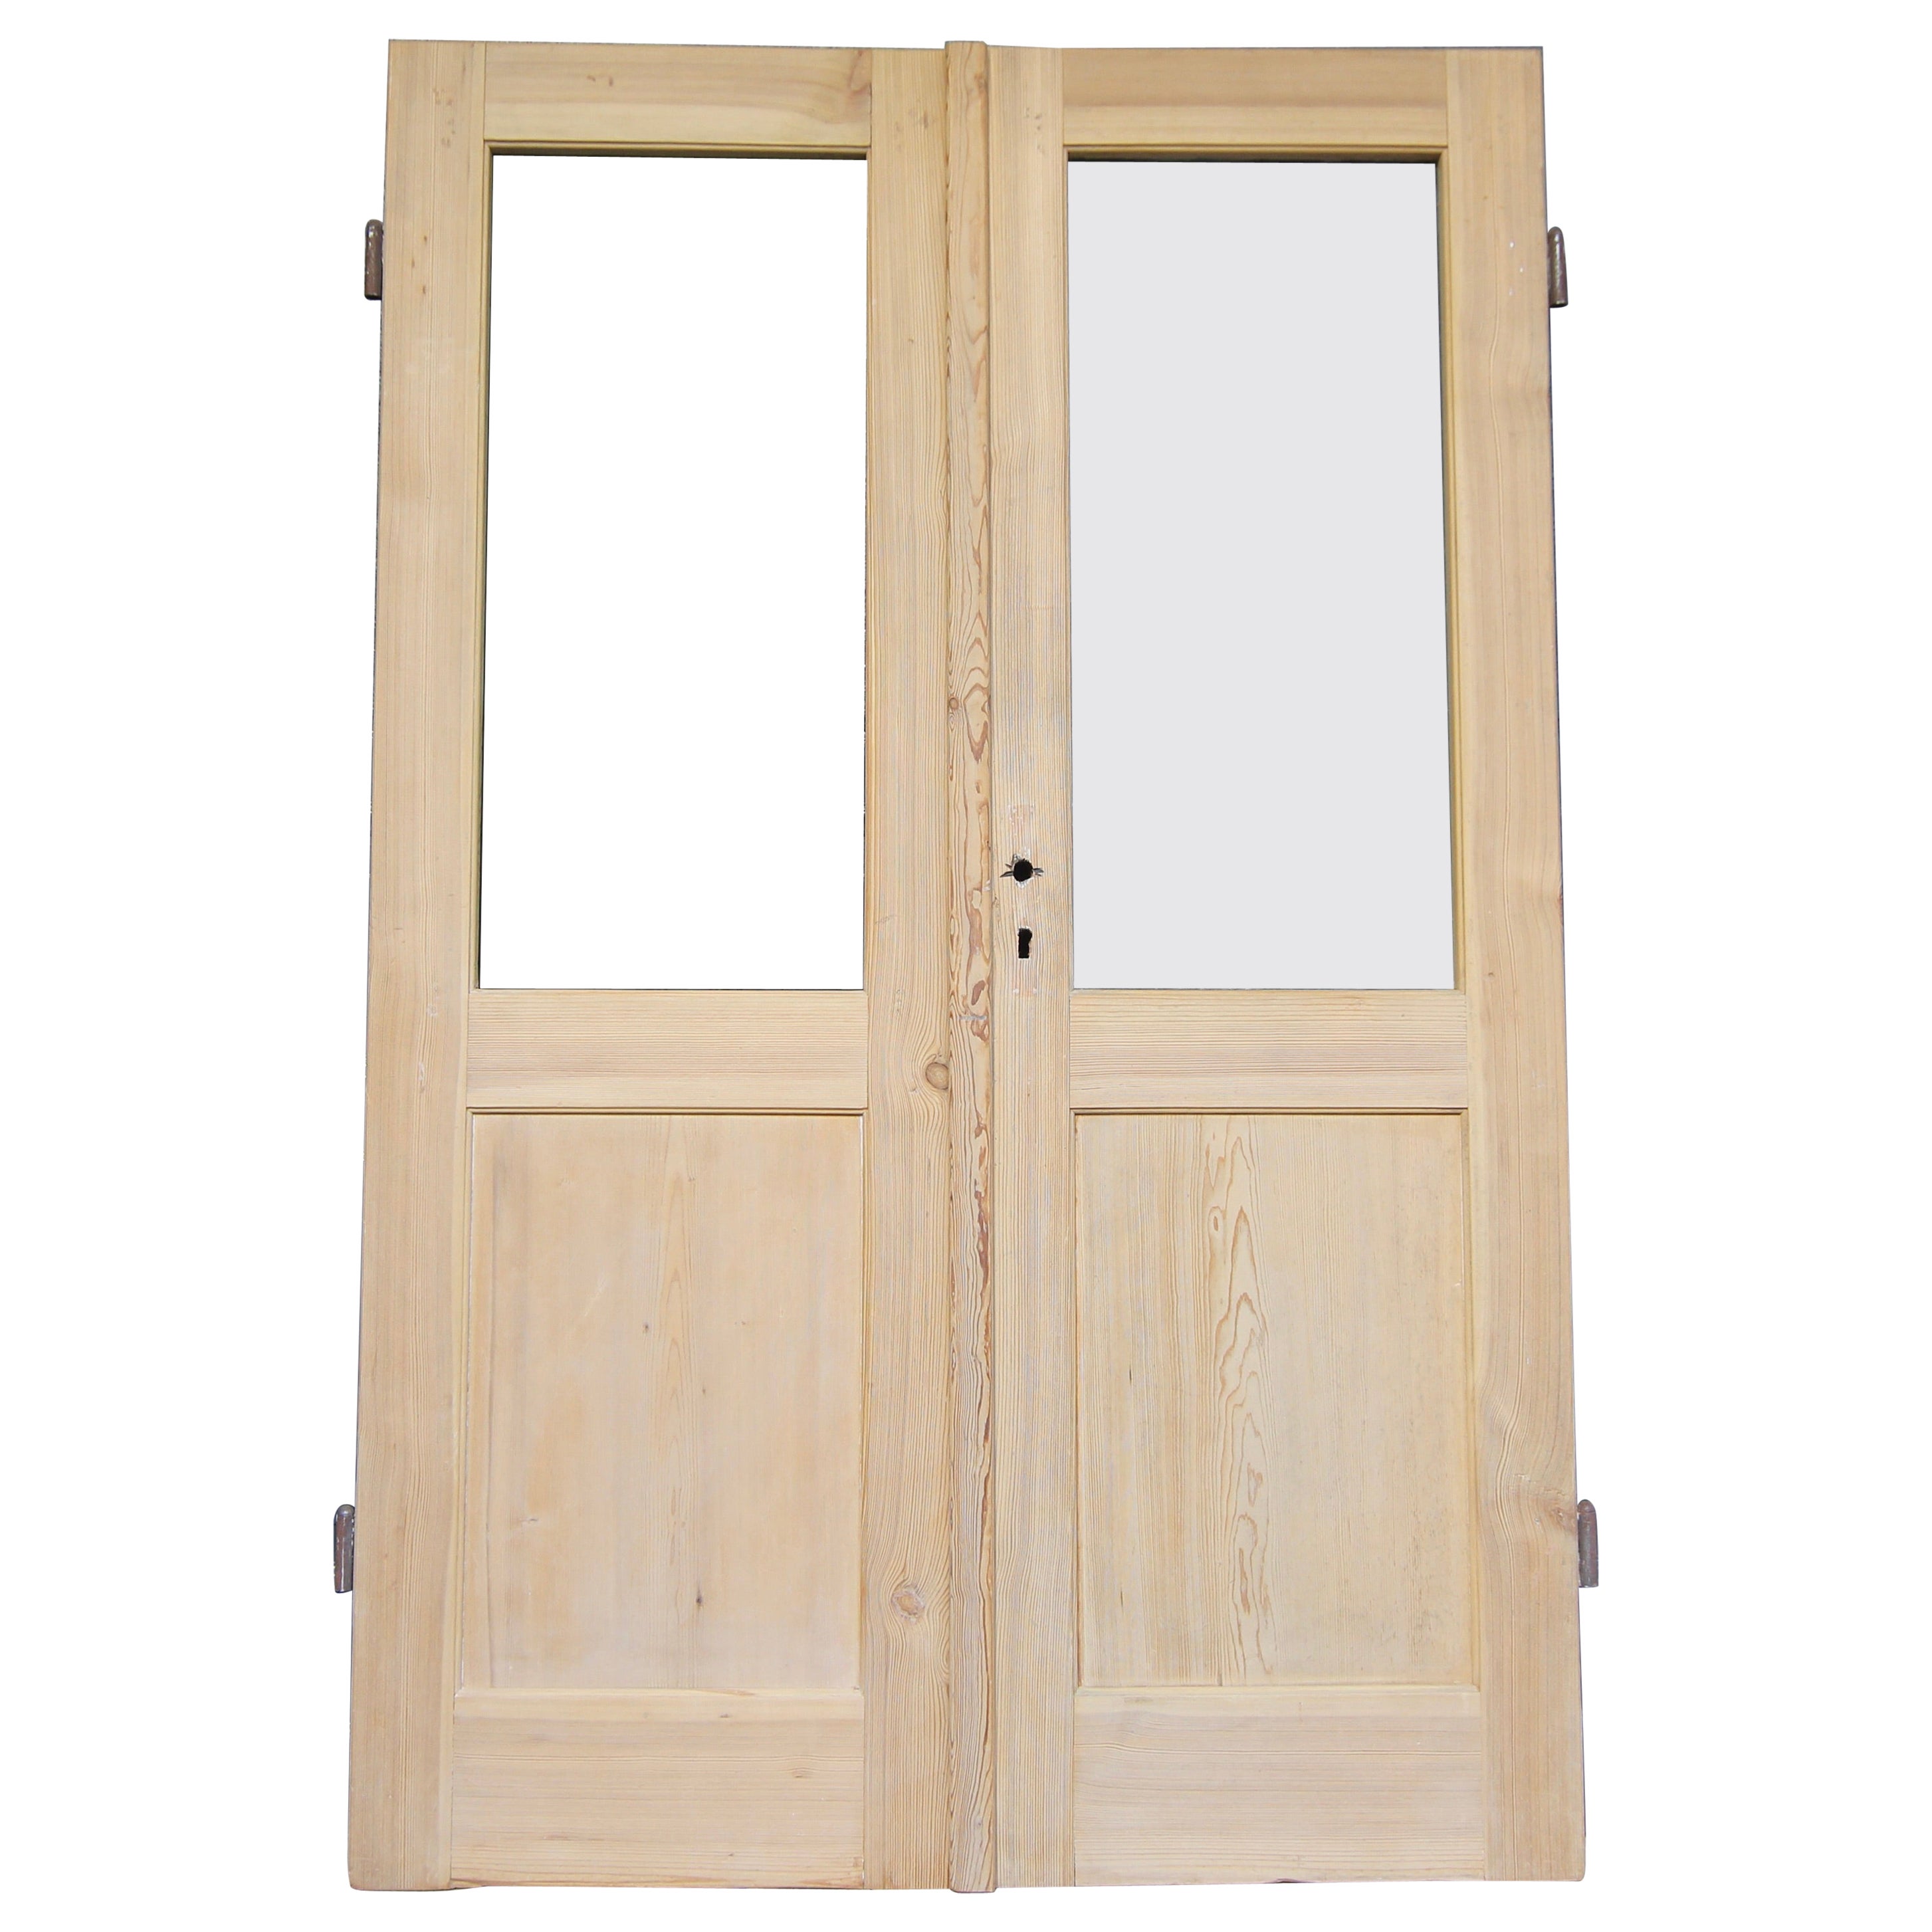 Early 20th Century Double Door made of Pine